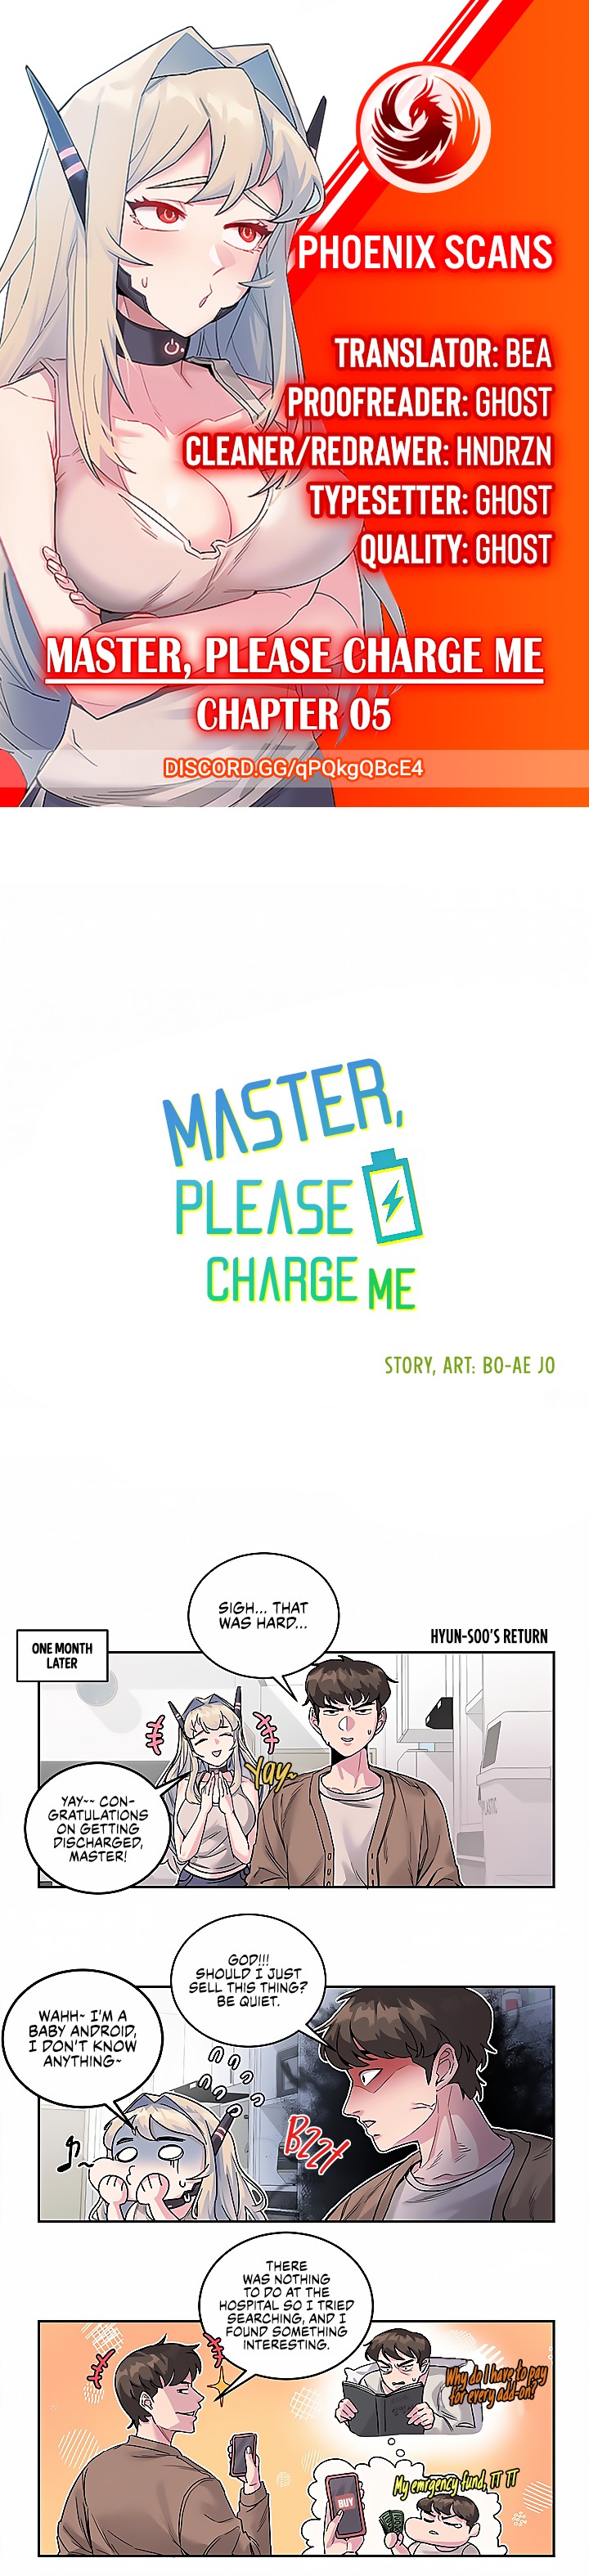 Master, Please Charge Me - Chapter 5 Page 1